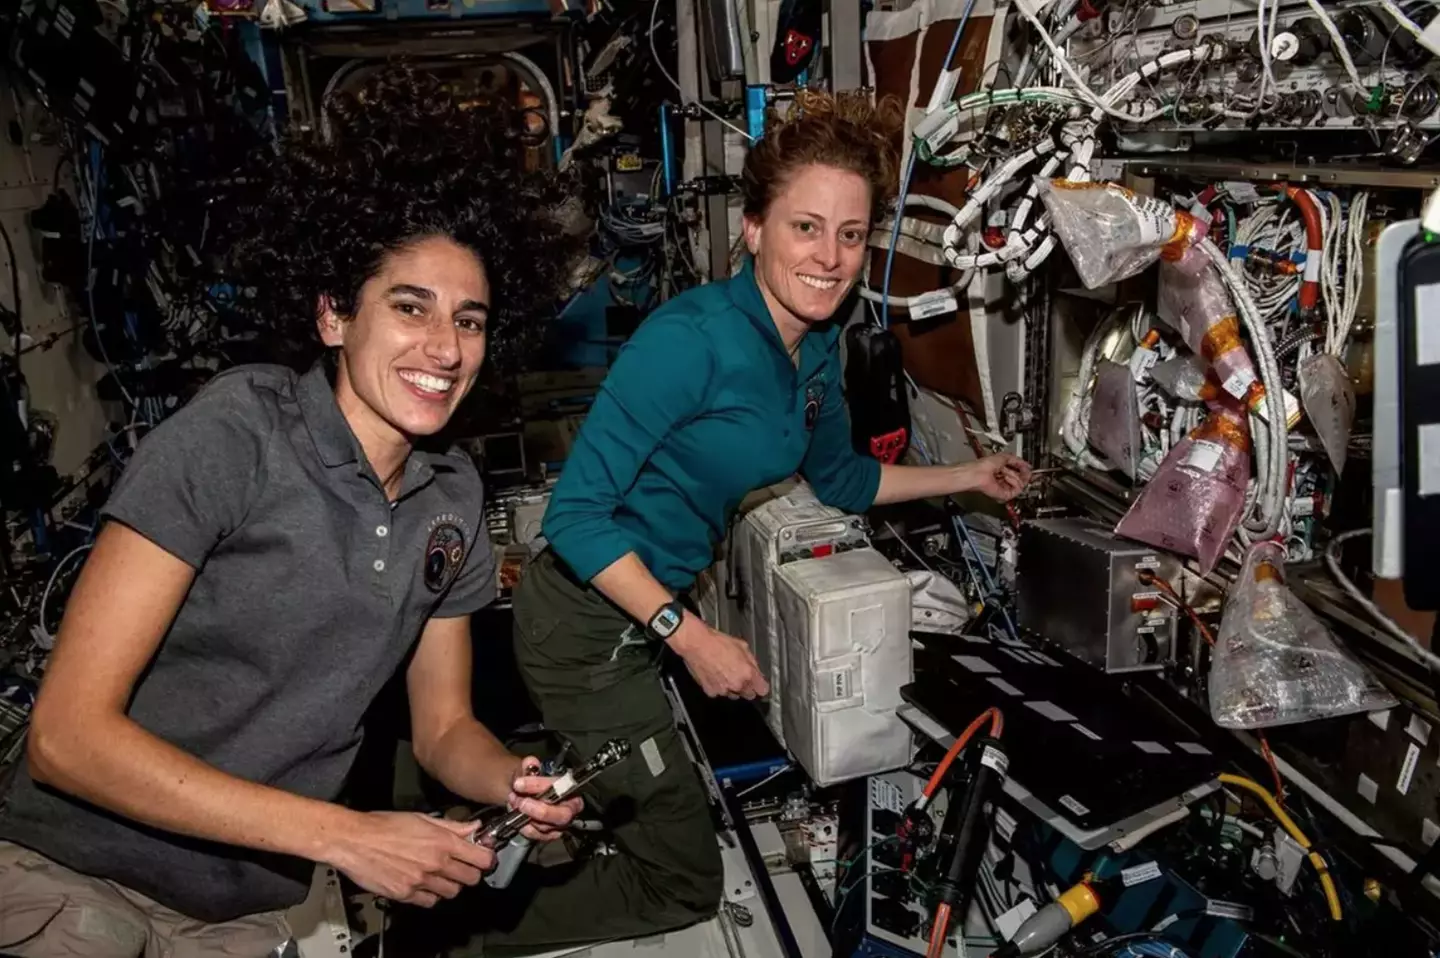 NASA astronauts Jasmin Moghbeli and Loral O'Hara were carrying out a spacewalk from the ISS when they lost track of the bag.